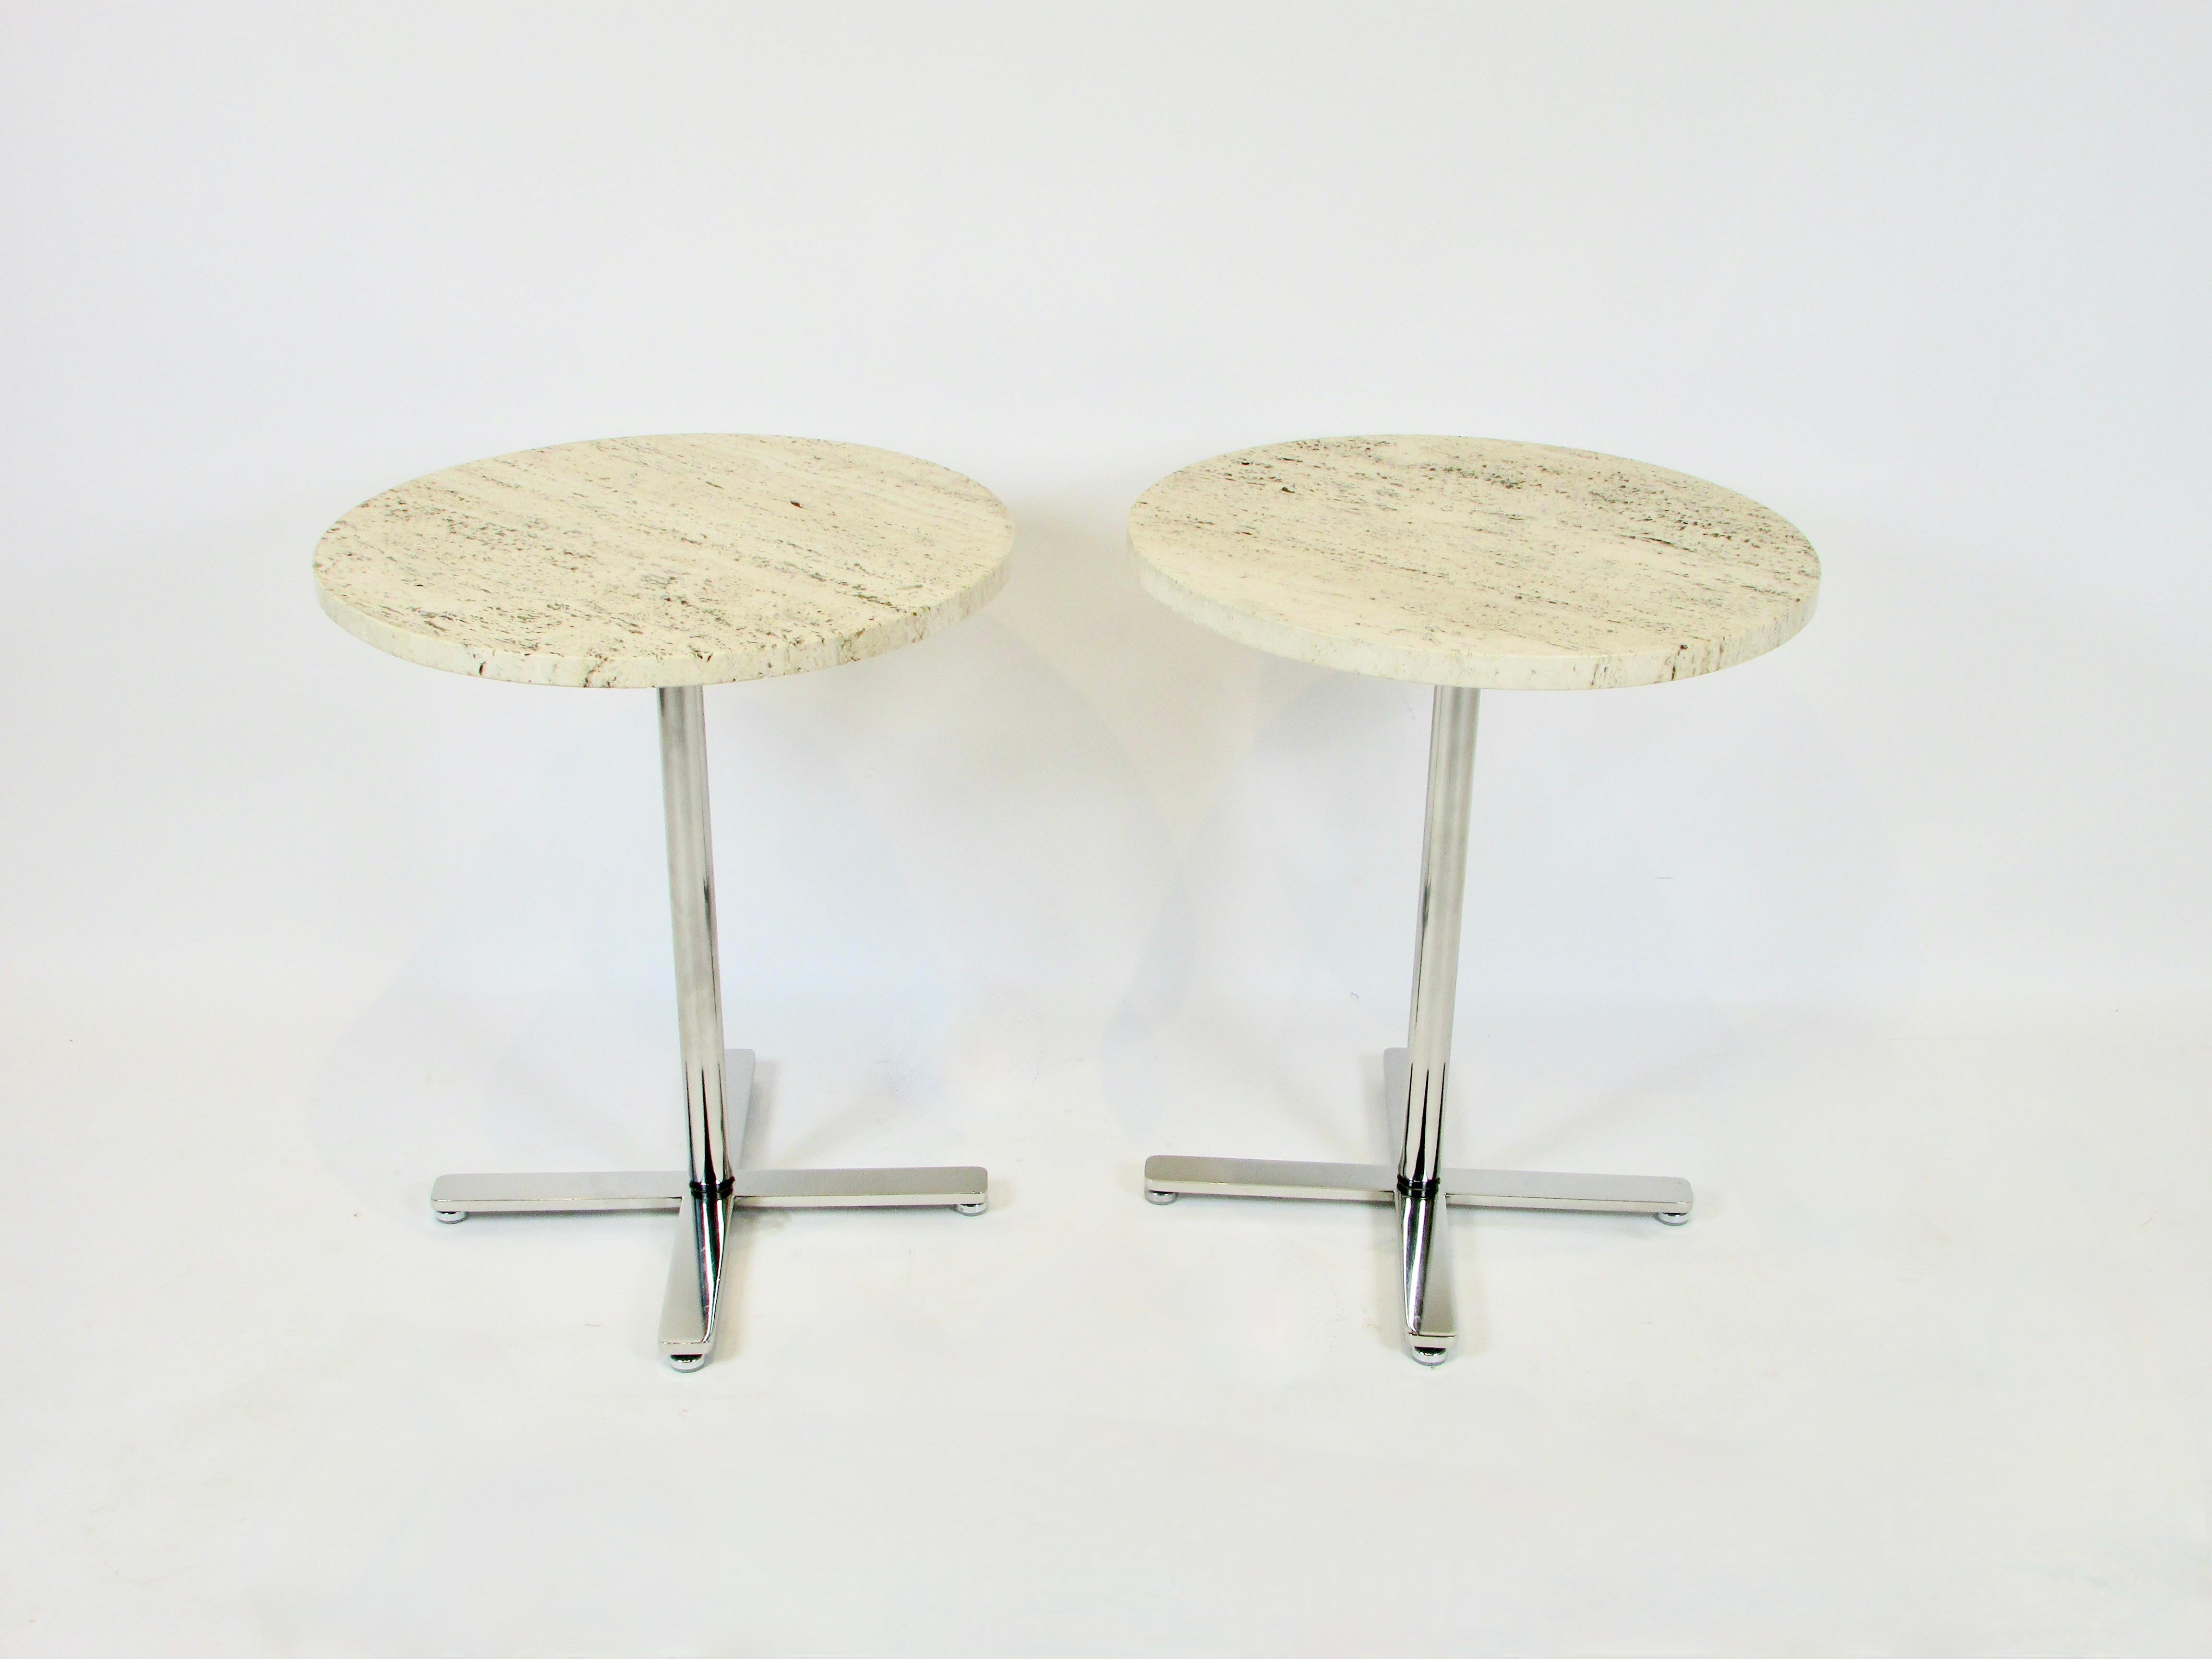 Pair of Helikon Open Grain Travertine Marble on Stainless Steel Base Tables For Sale 4